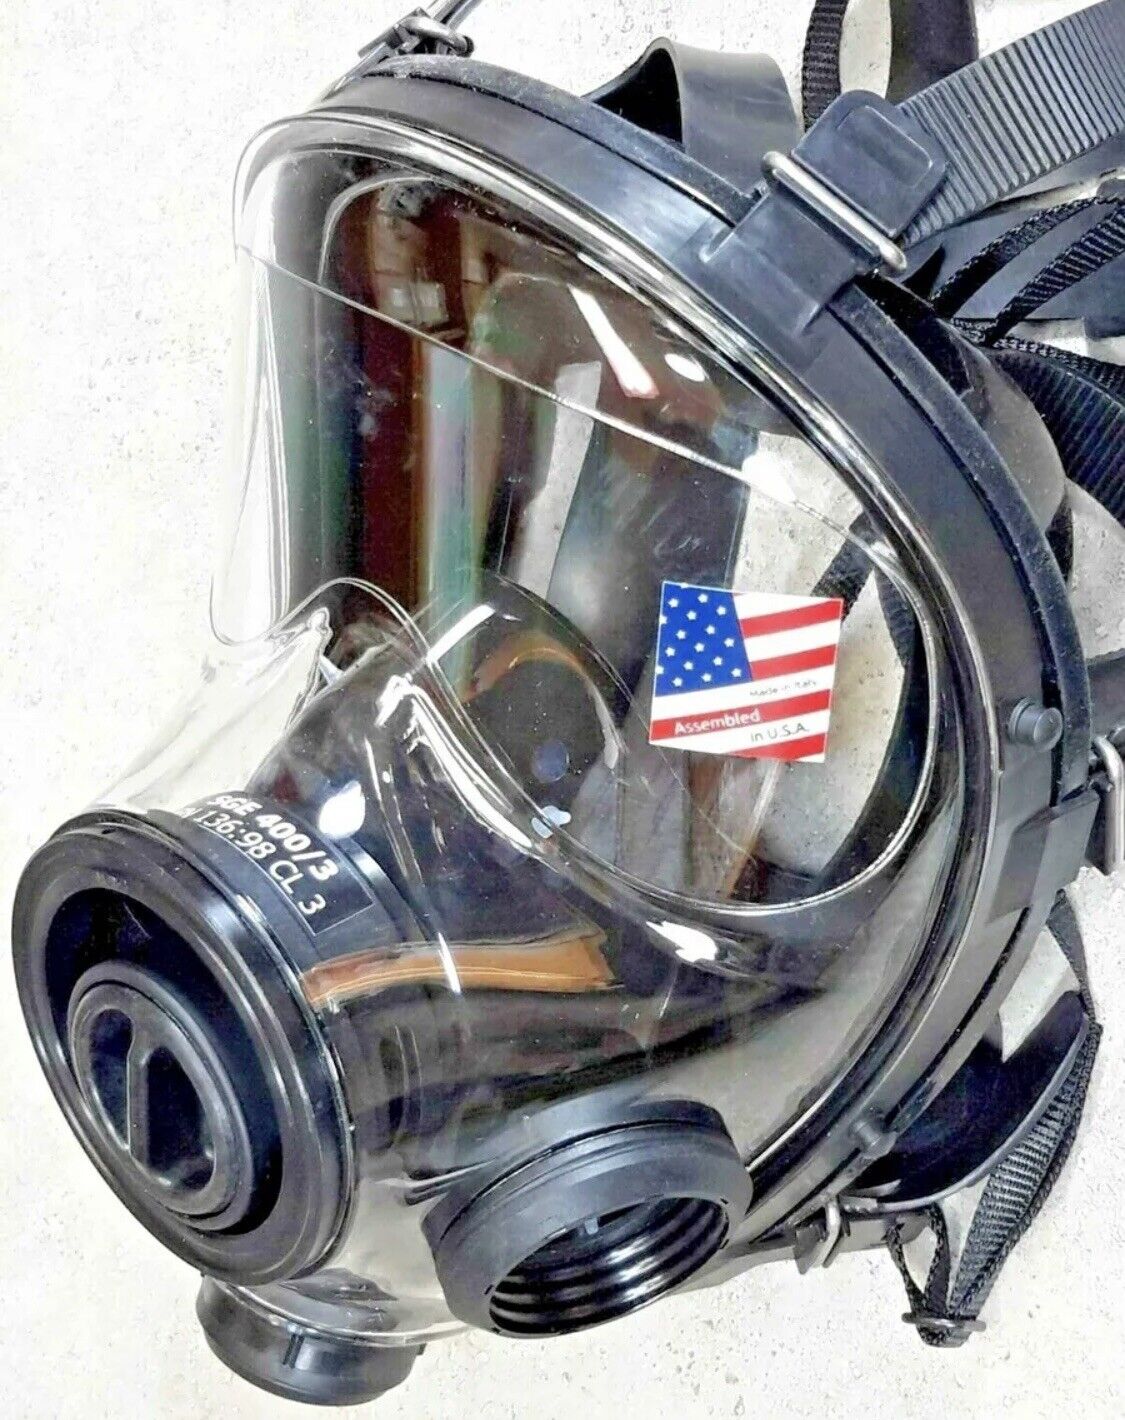 SGE 400/3 BB Gas Mask / 40mm NATO Respirator -CBRN & NBC Protection MADE IN 2023